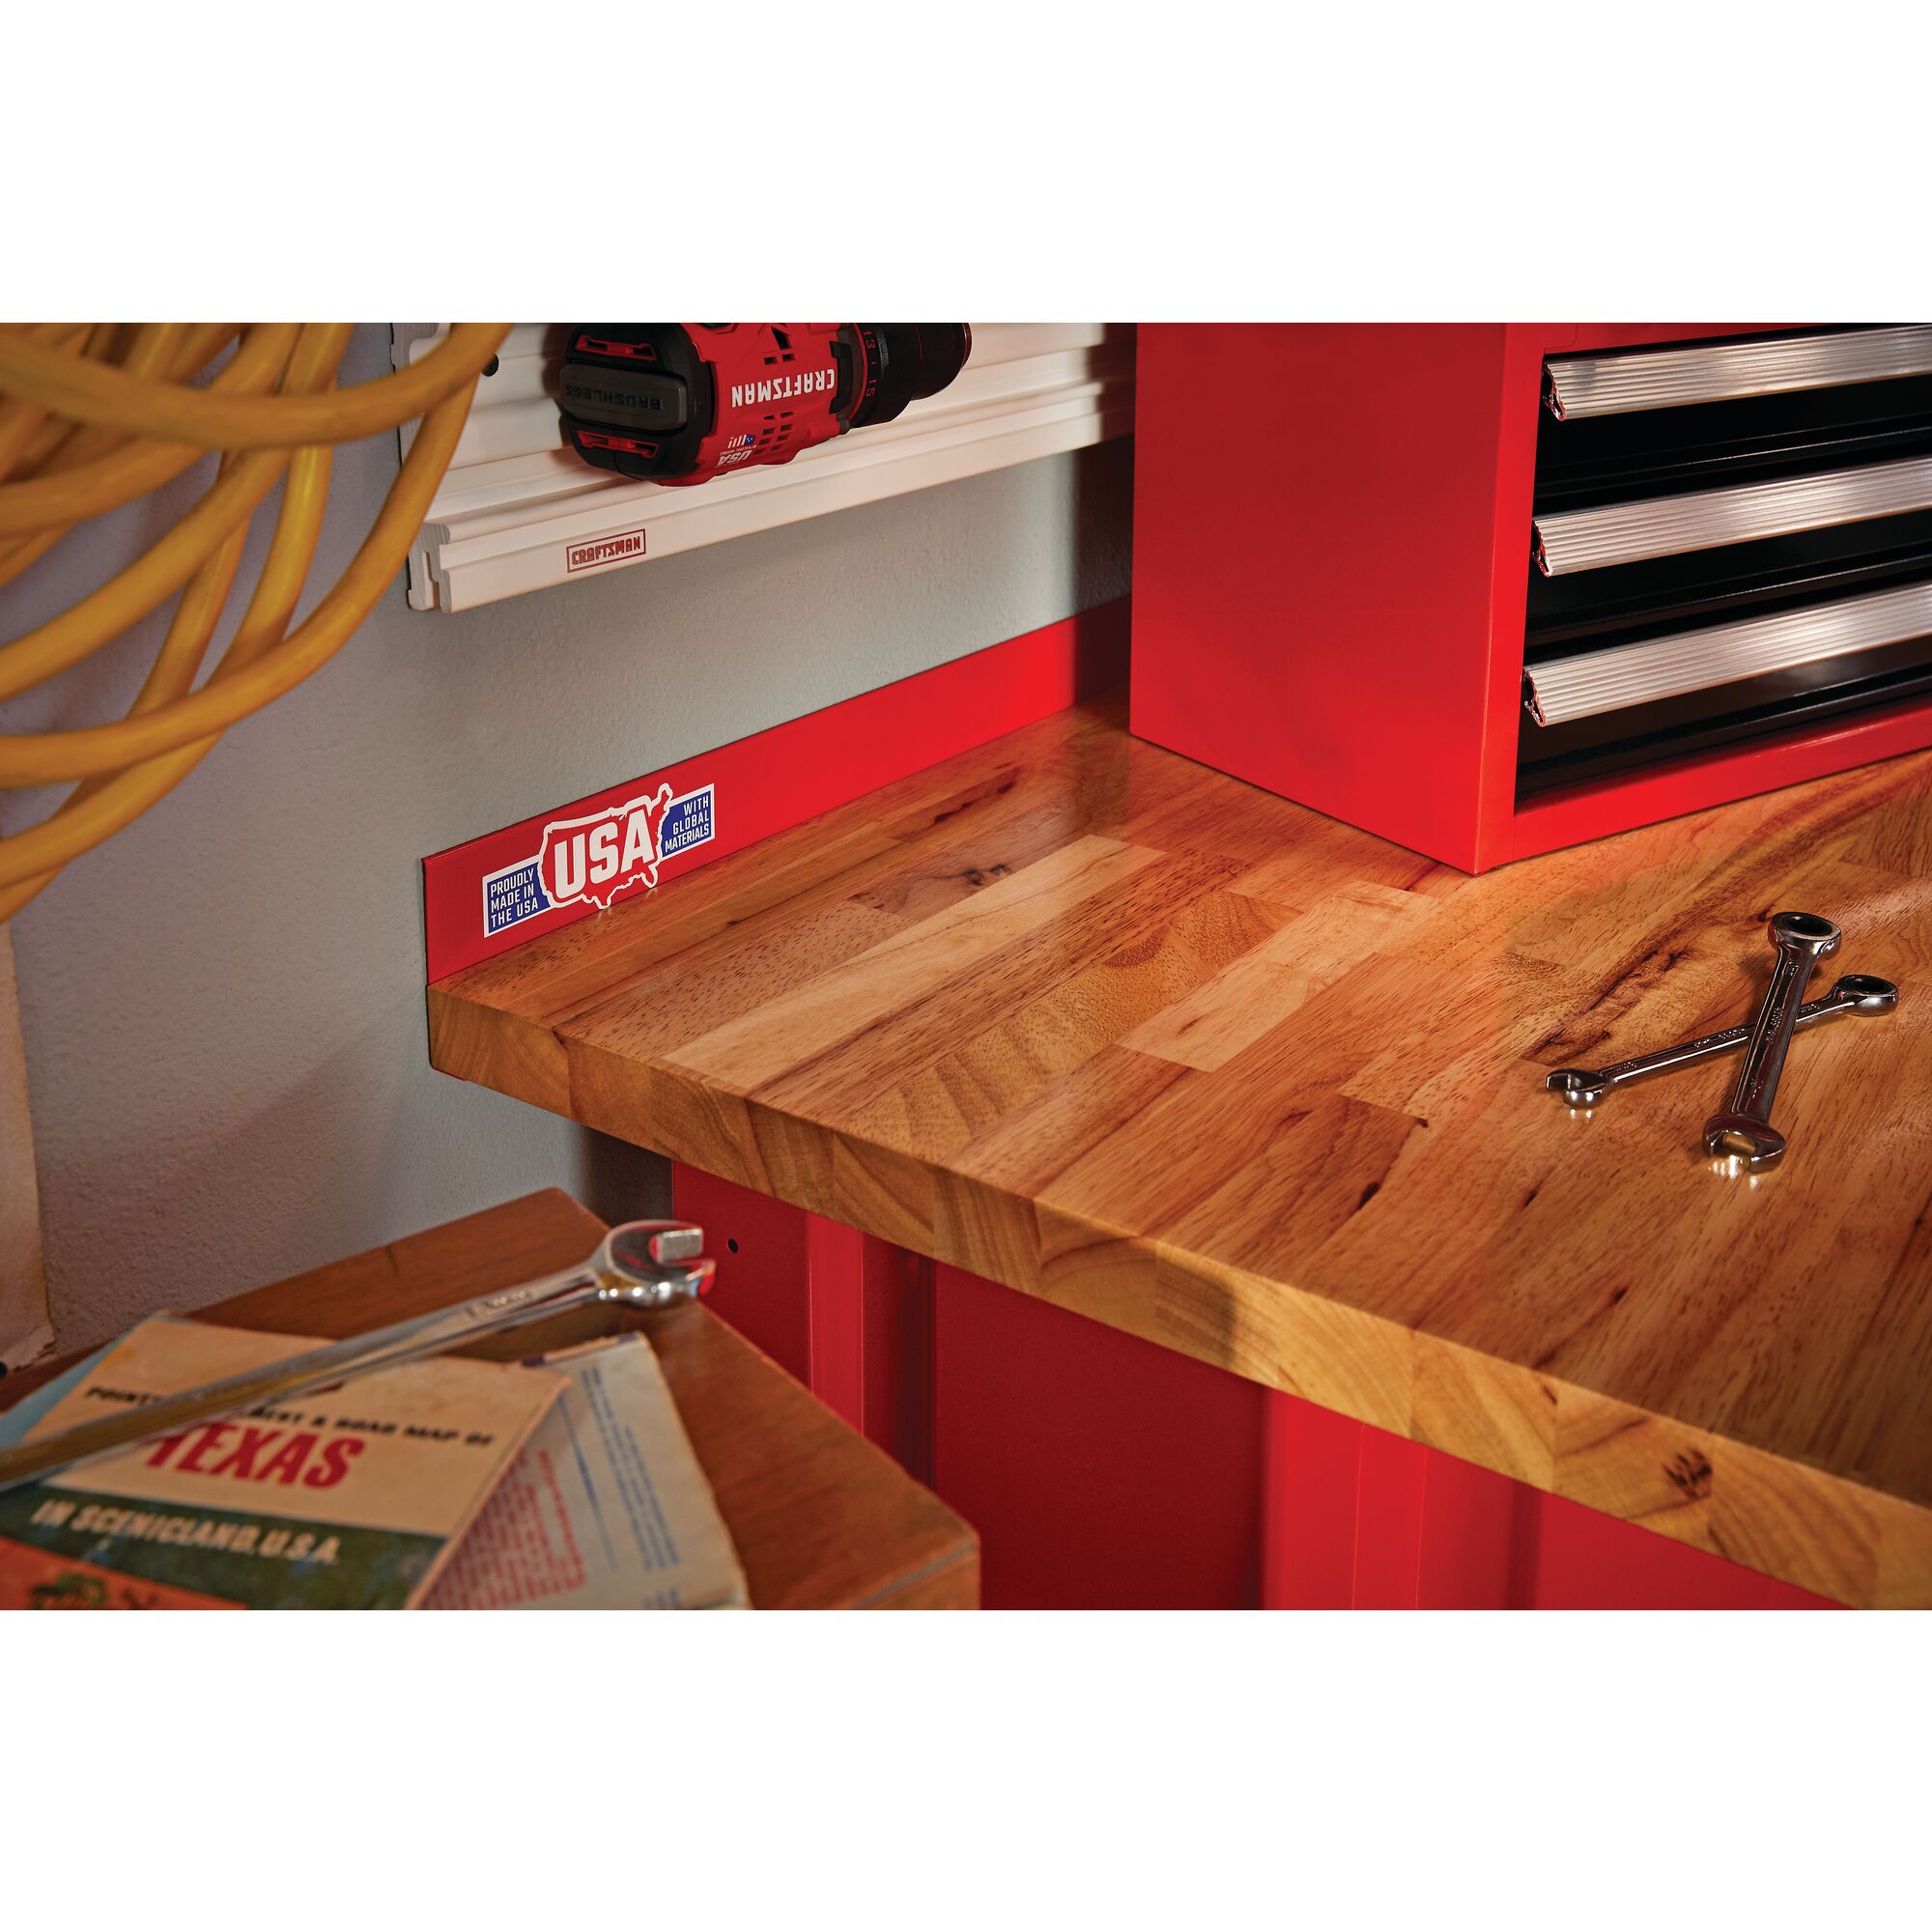 Spanners and other tool boxes placed on top of 6 foot wide Workbench with Butcher Block Top.